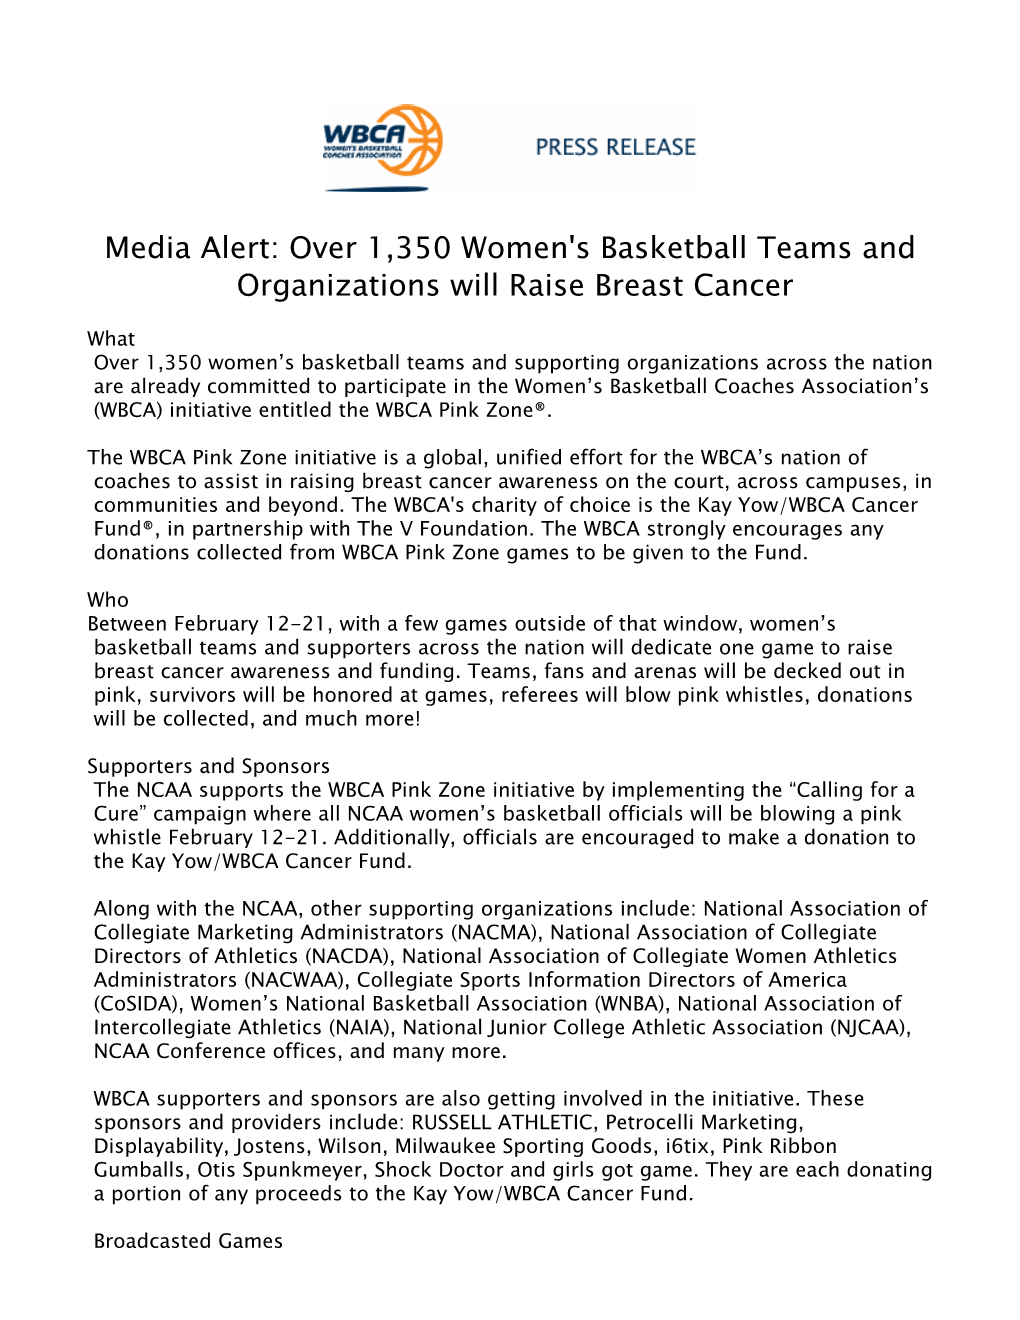 Media Alert: Over 1,350 Women's Basketball Teams and Organizations Will Raise Breast Cancer